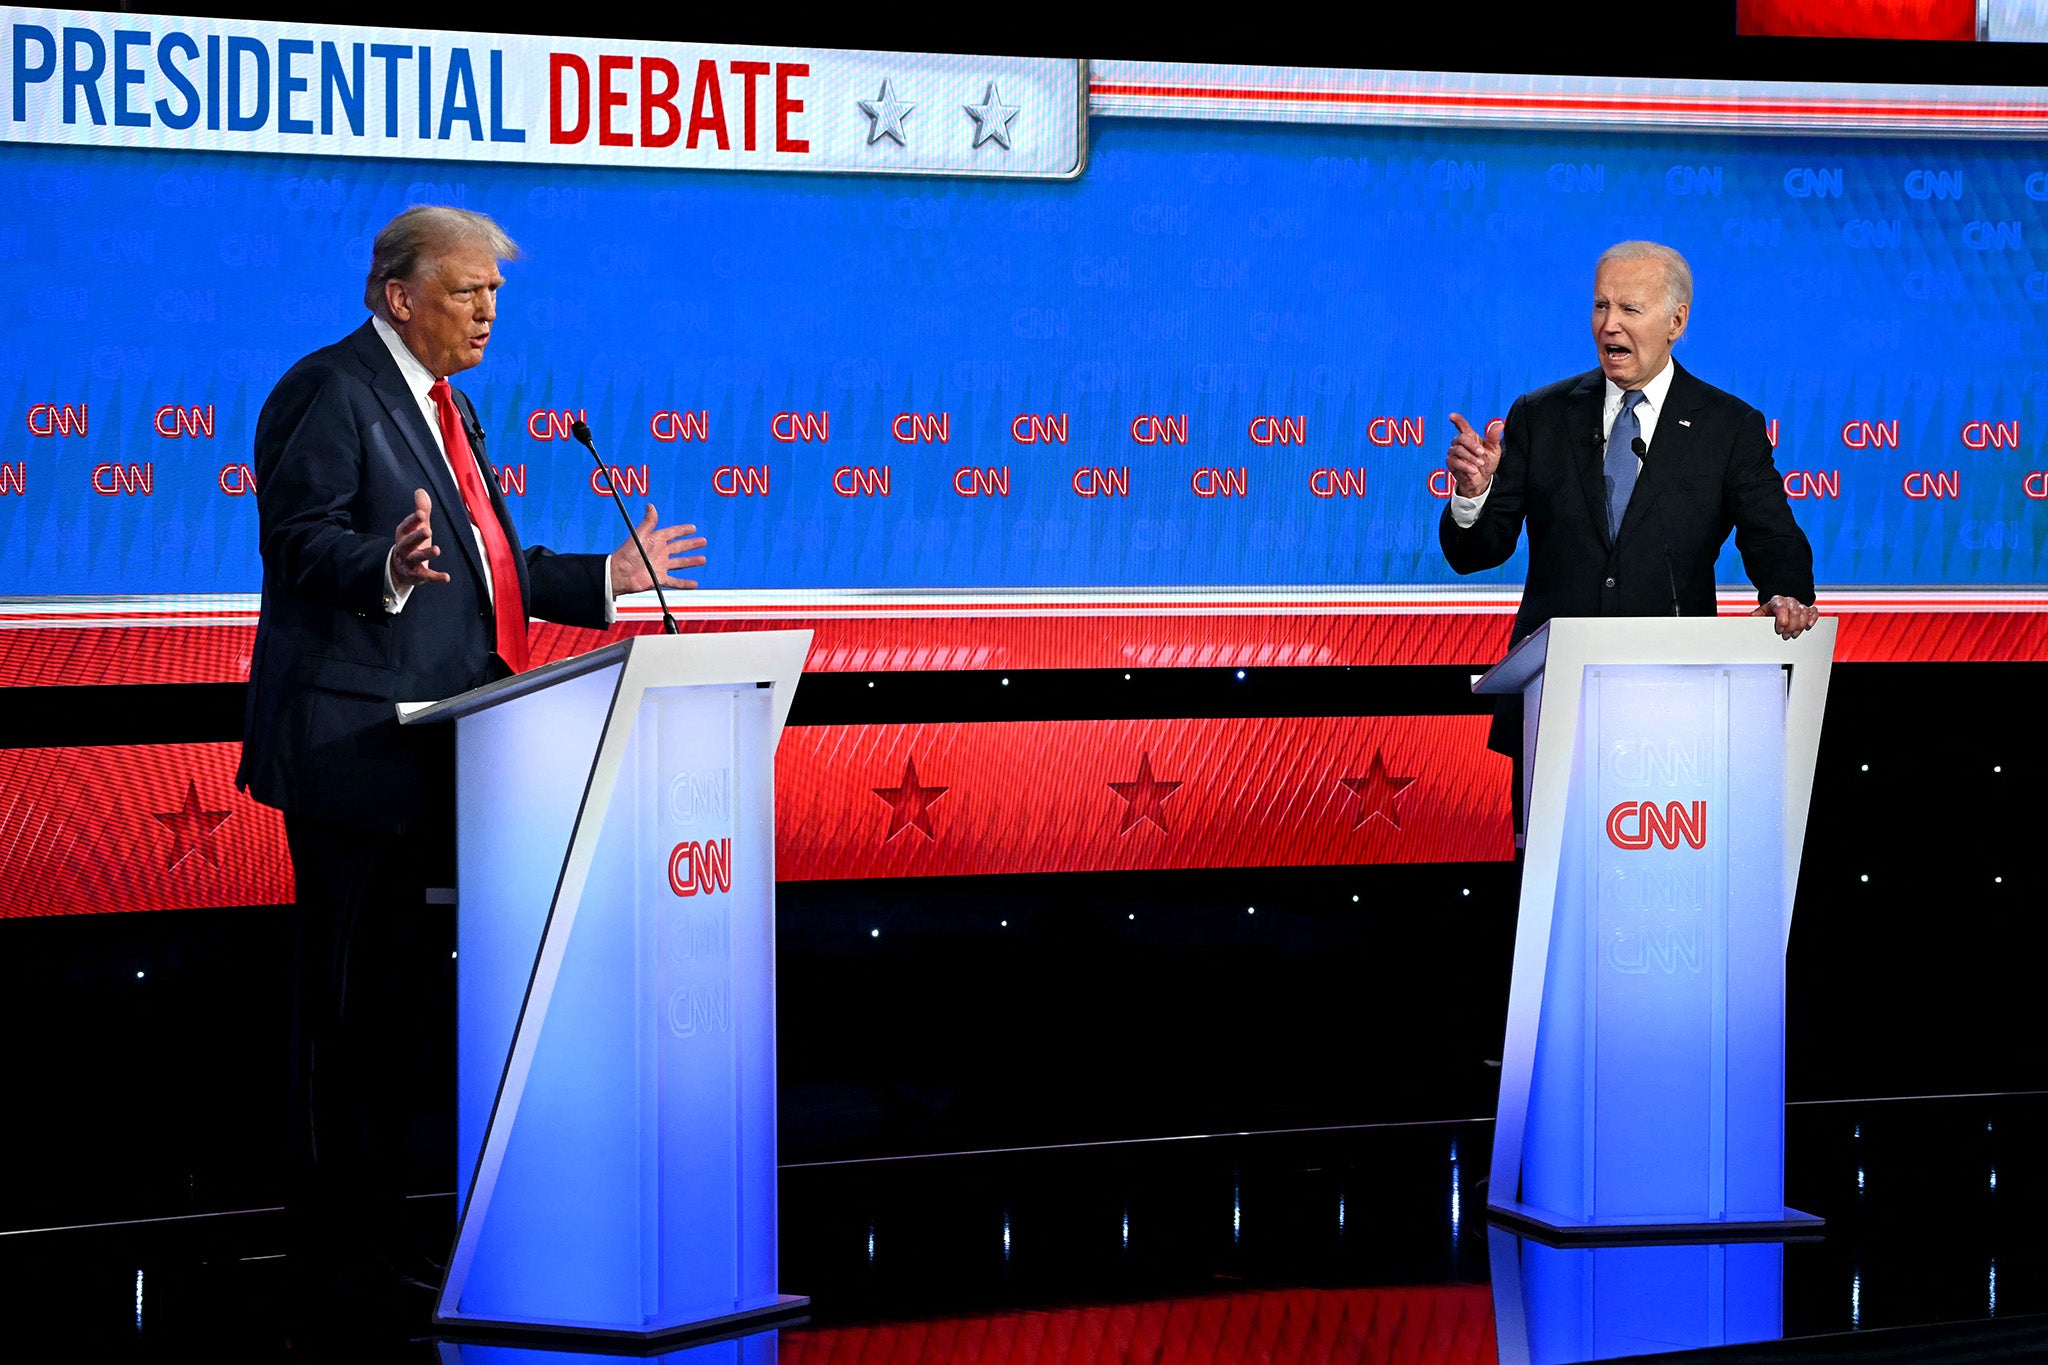 Biden appeared more timid and softly-spoken at Thursday’s CNN debate than some of his staff attest